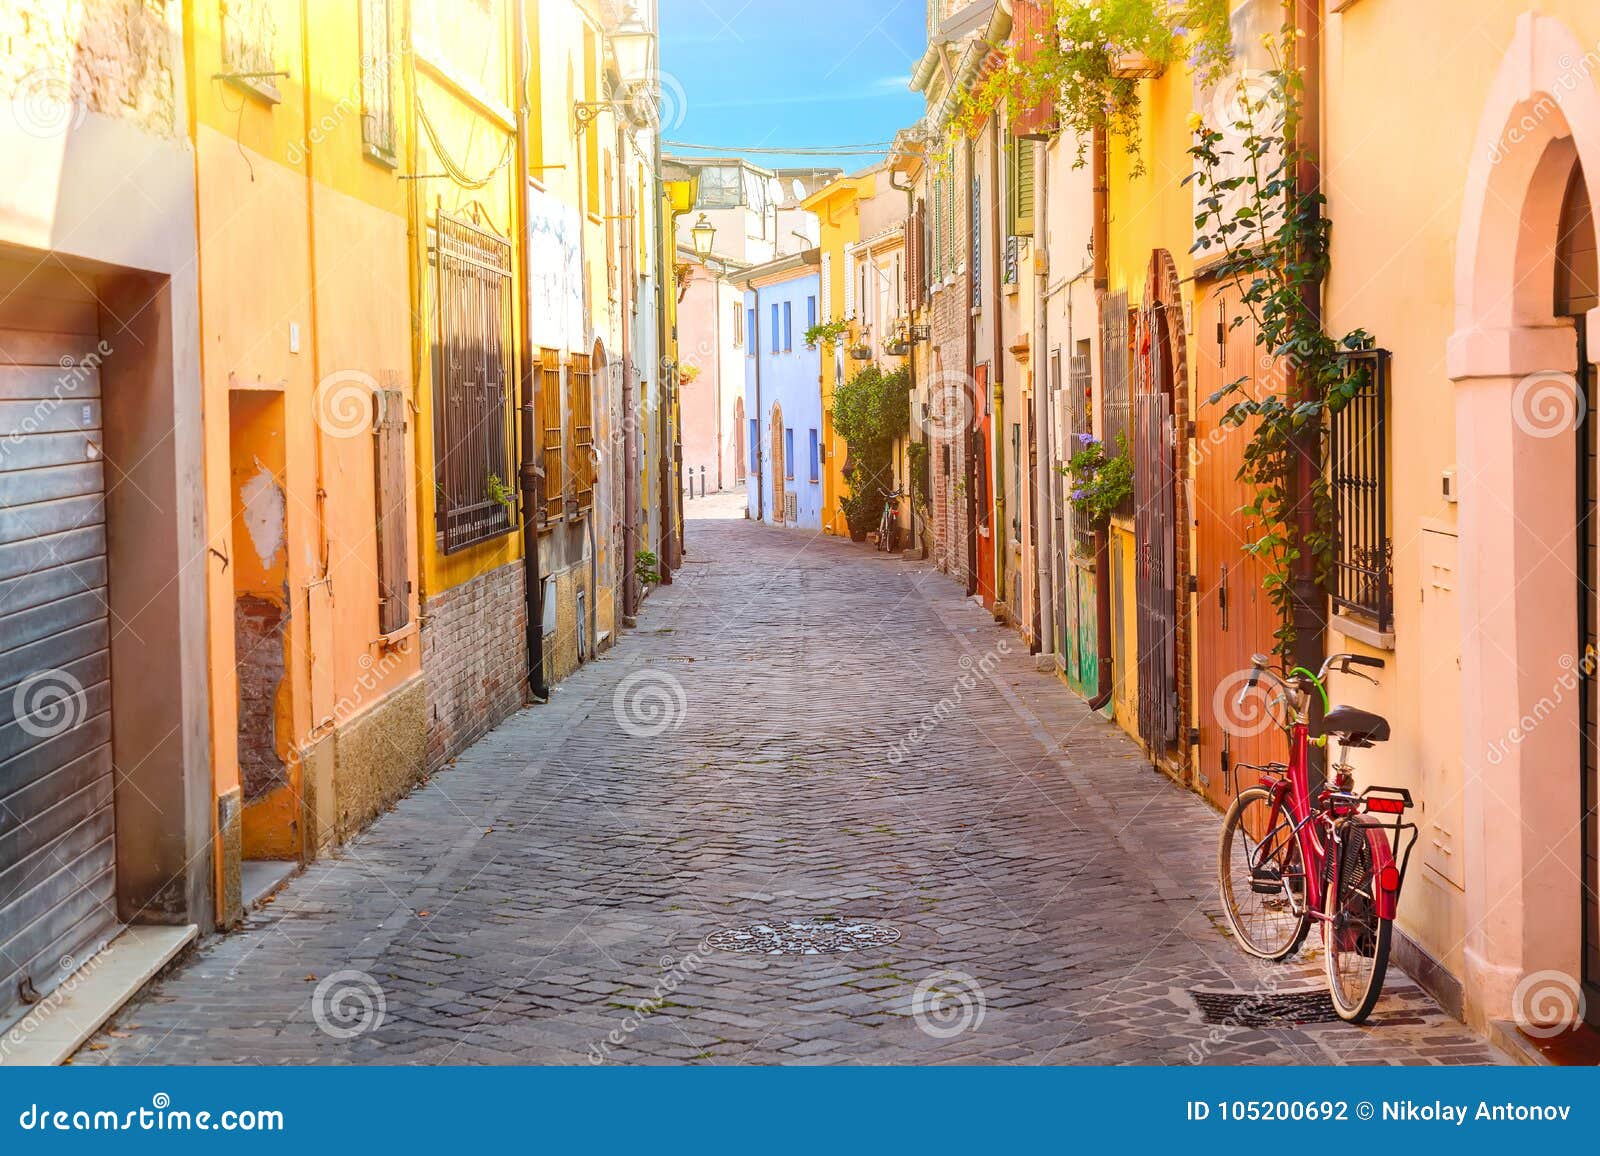 narrow street of the village of fishermen san guiliano with colorful houses and a bicycle in early morning in rimini, italy